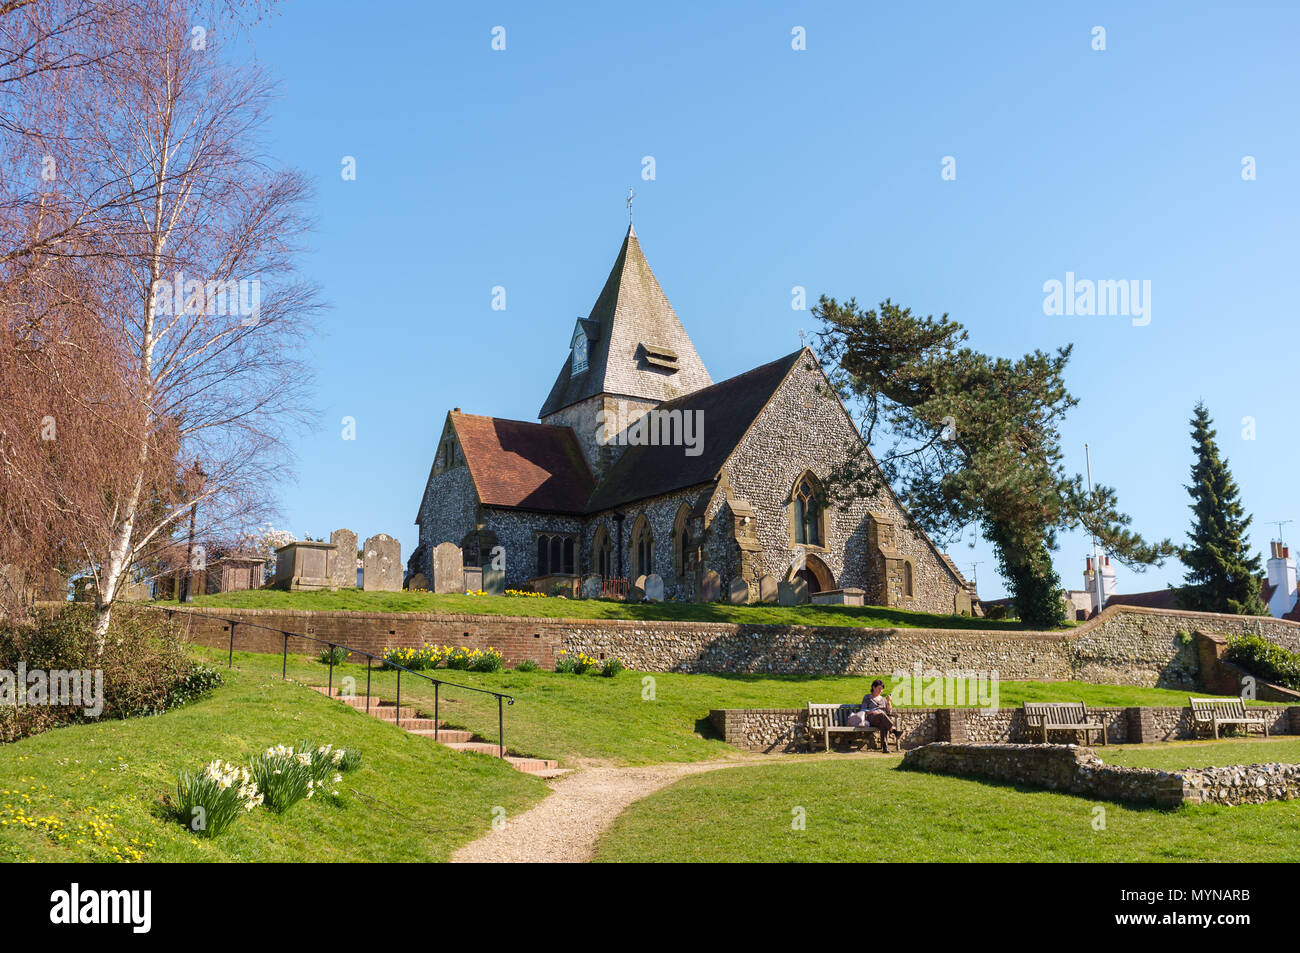 12th century church of Saint Margaret's on the village green in Ditchling, East Sussex, UK on a sunny spring day. Stock Photo